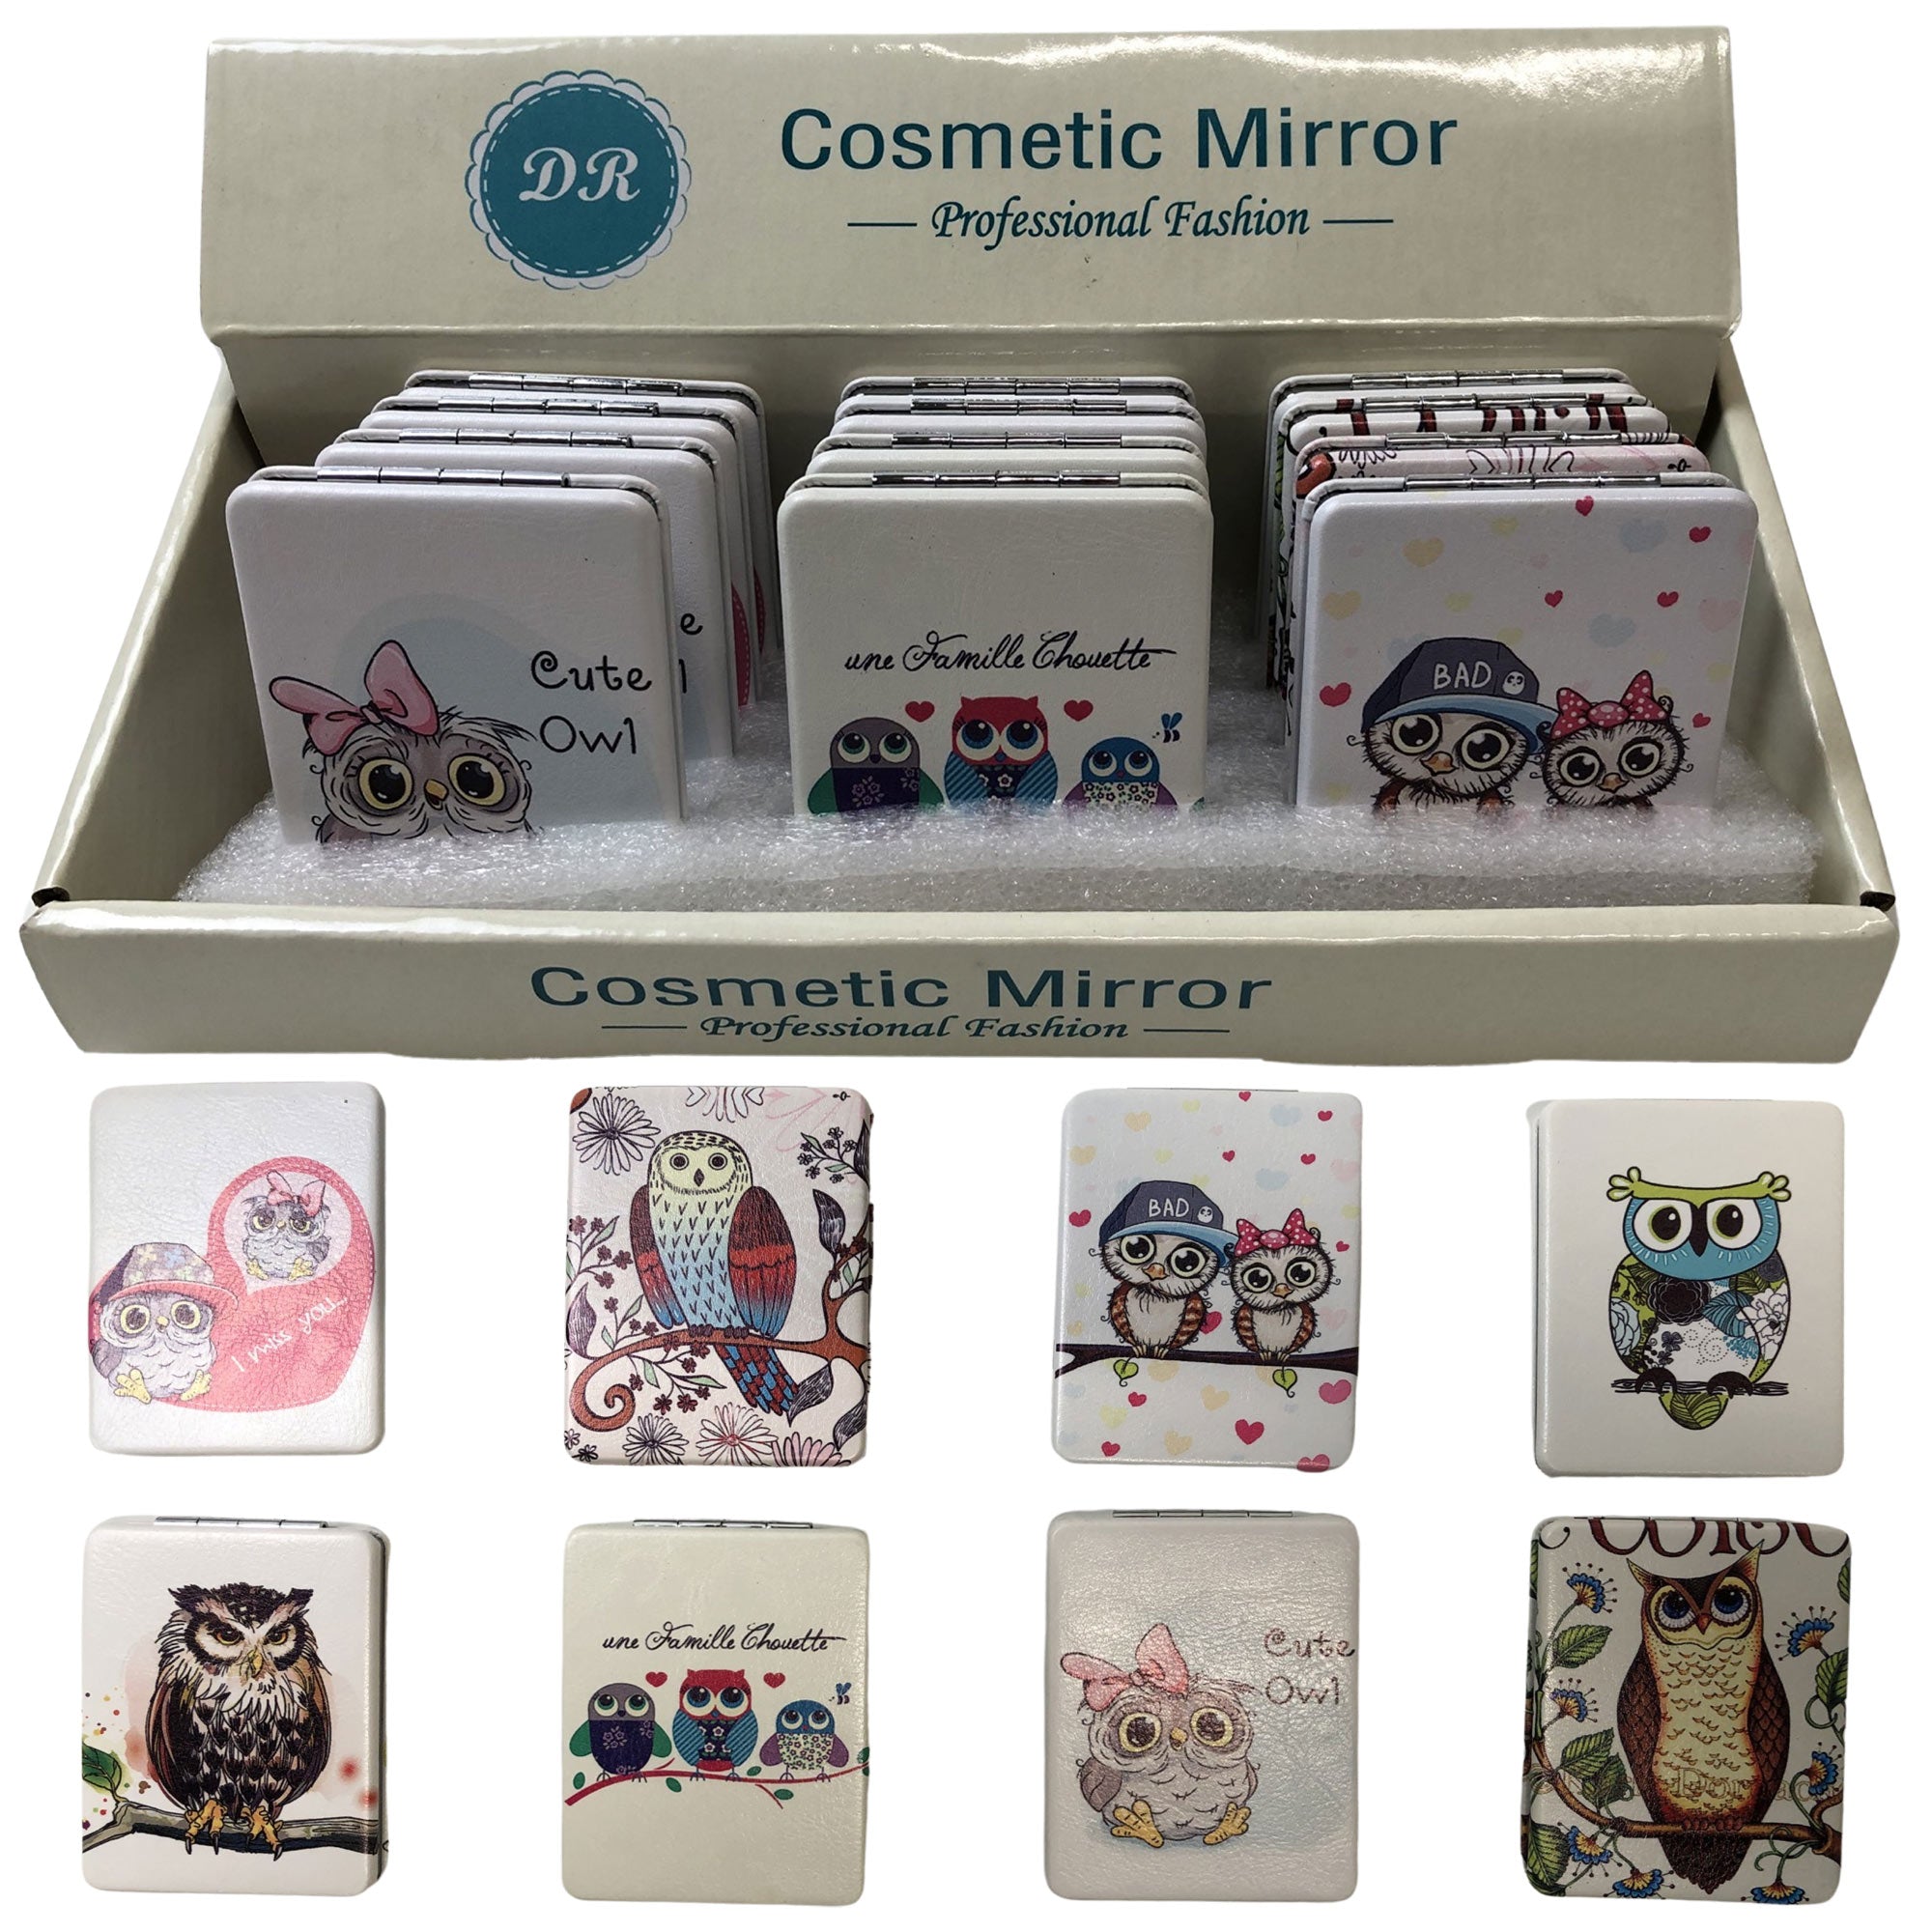 CLEARANCE COSMETIC MIRRORS OWL PRINTS (CASE OF 48 - $1.50 / PIECE)  Wholesale Cosmetic Mirrors in Owl Prints SKU: 901-OWL-48